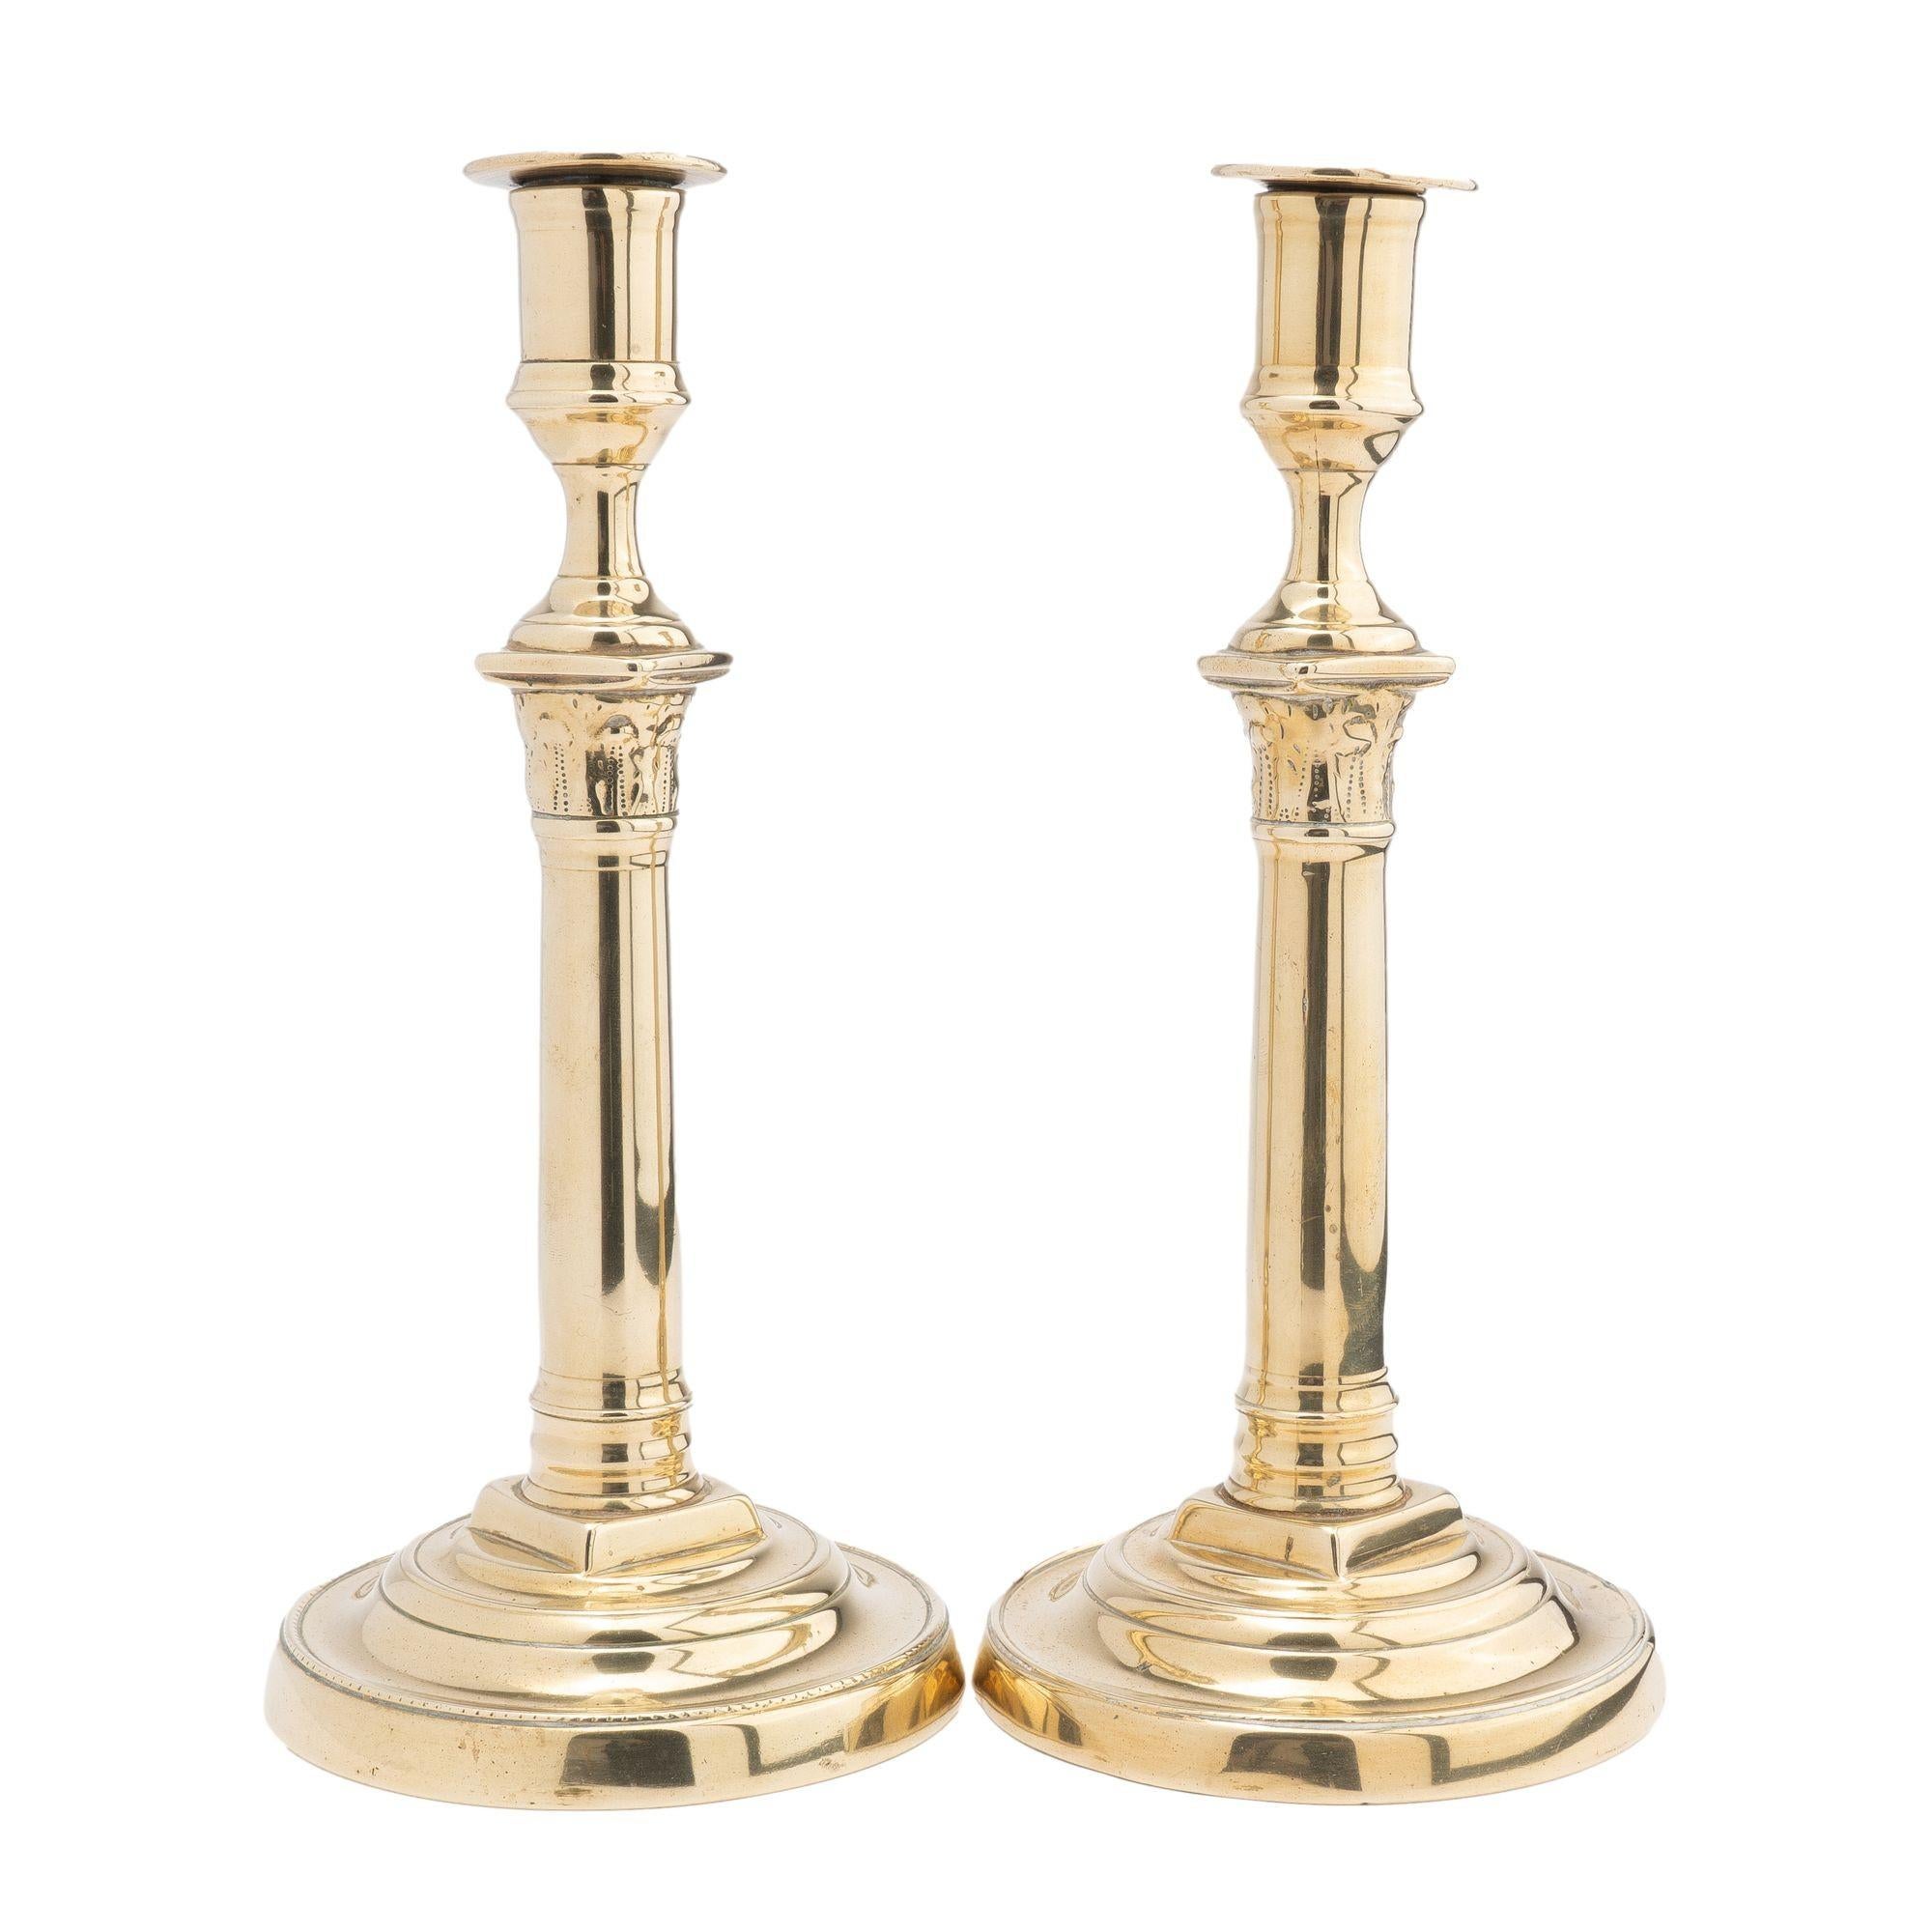 Pair of cast brass columnar candlesticks with Corinthian capitals supporting urn form candle cups. Seam construction with threaded attachment of the candle shaft to the base.
France, circa 1820.
Condition: Good original condition. Surfaces have